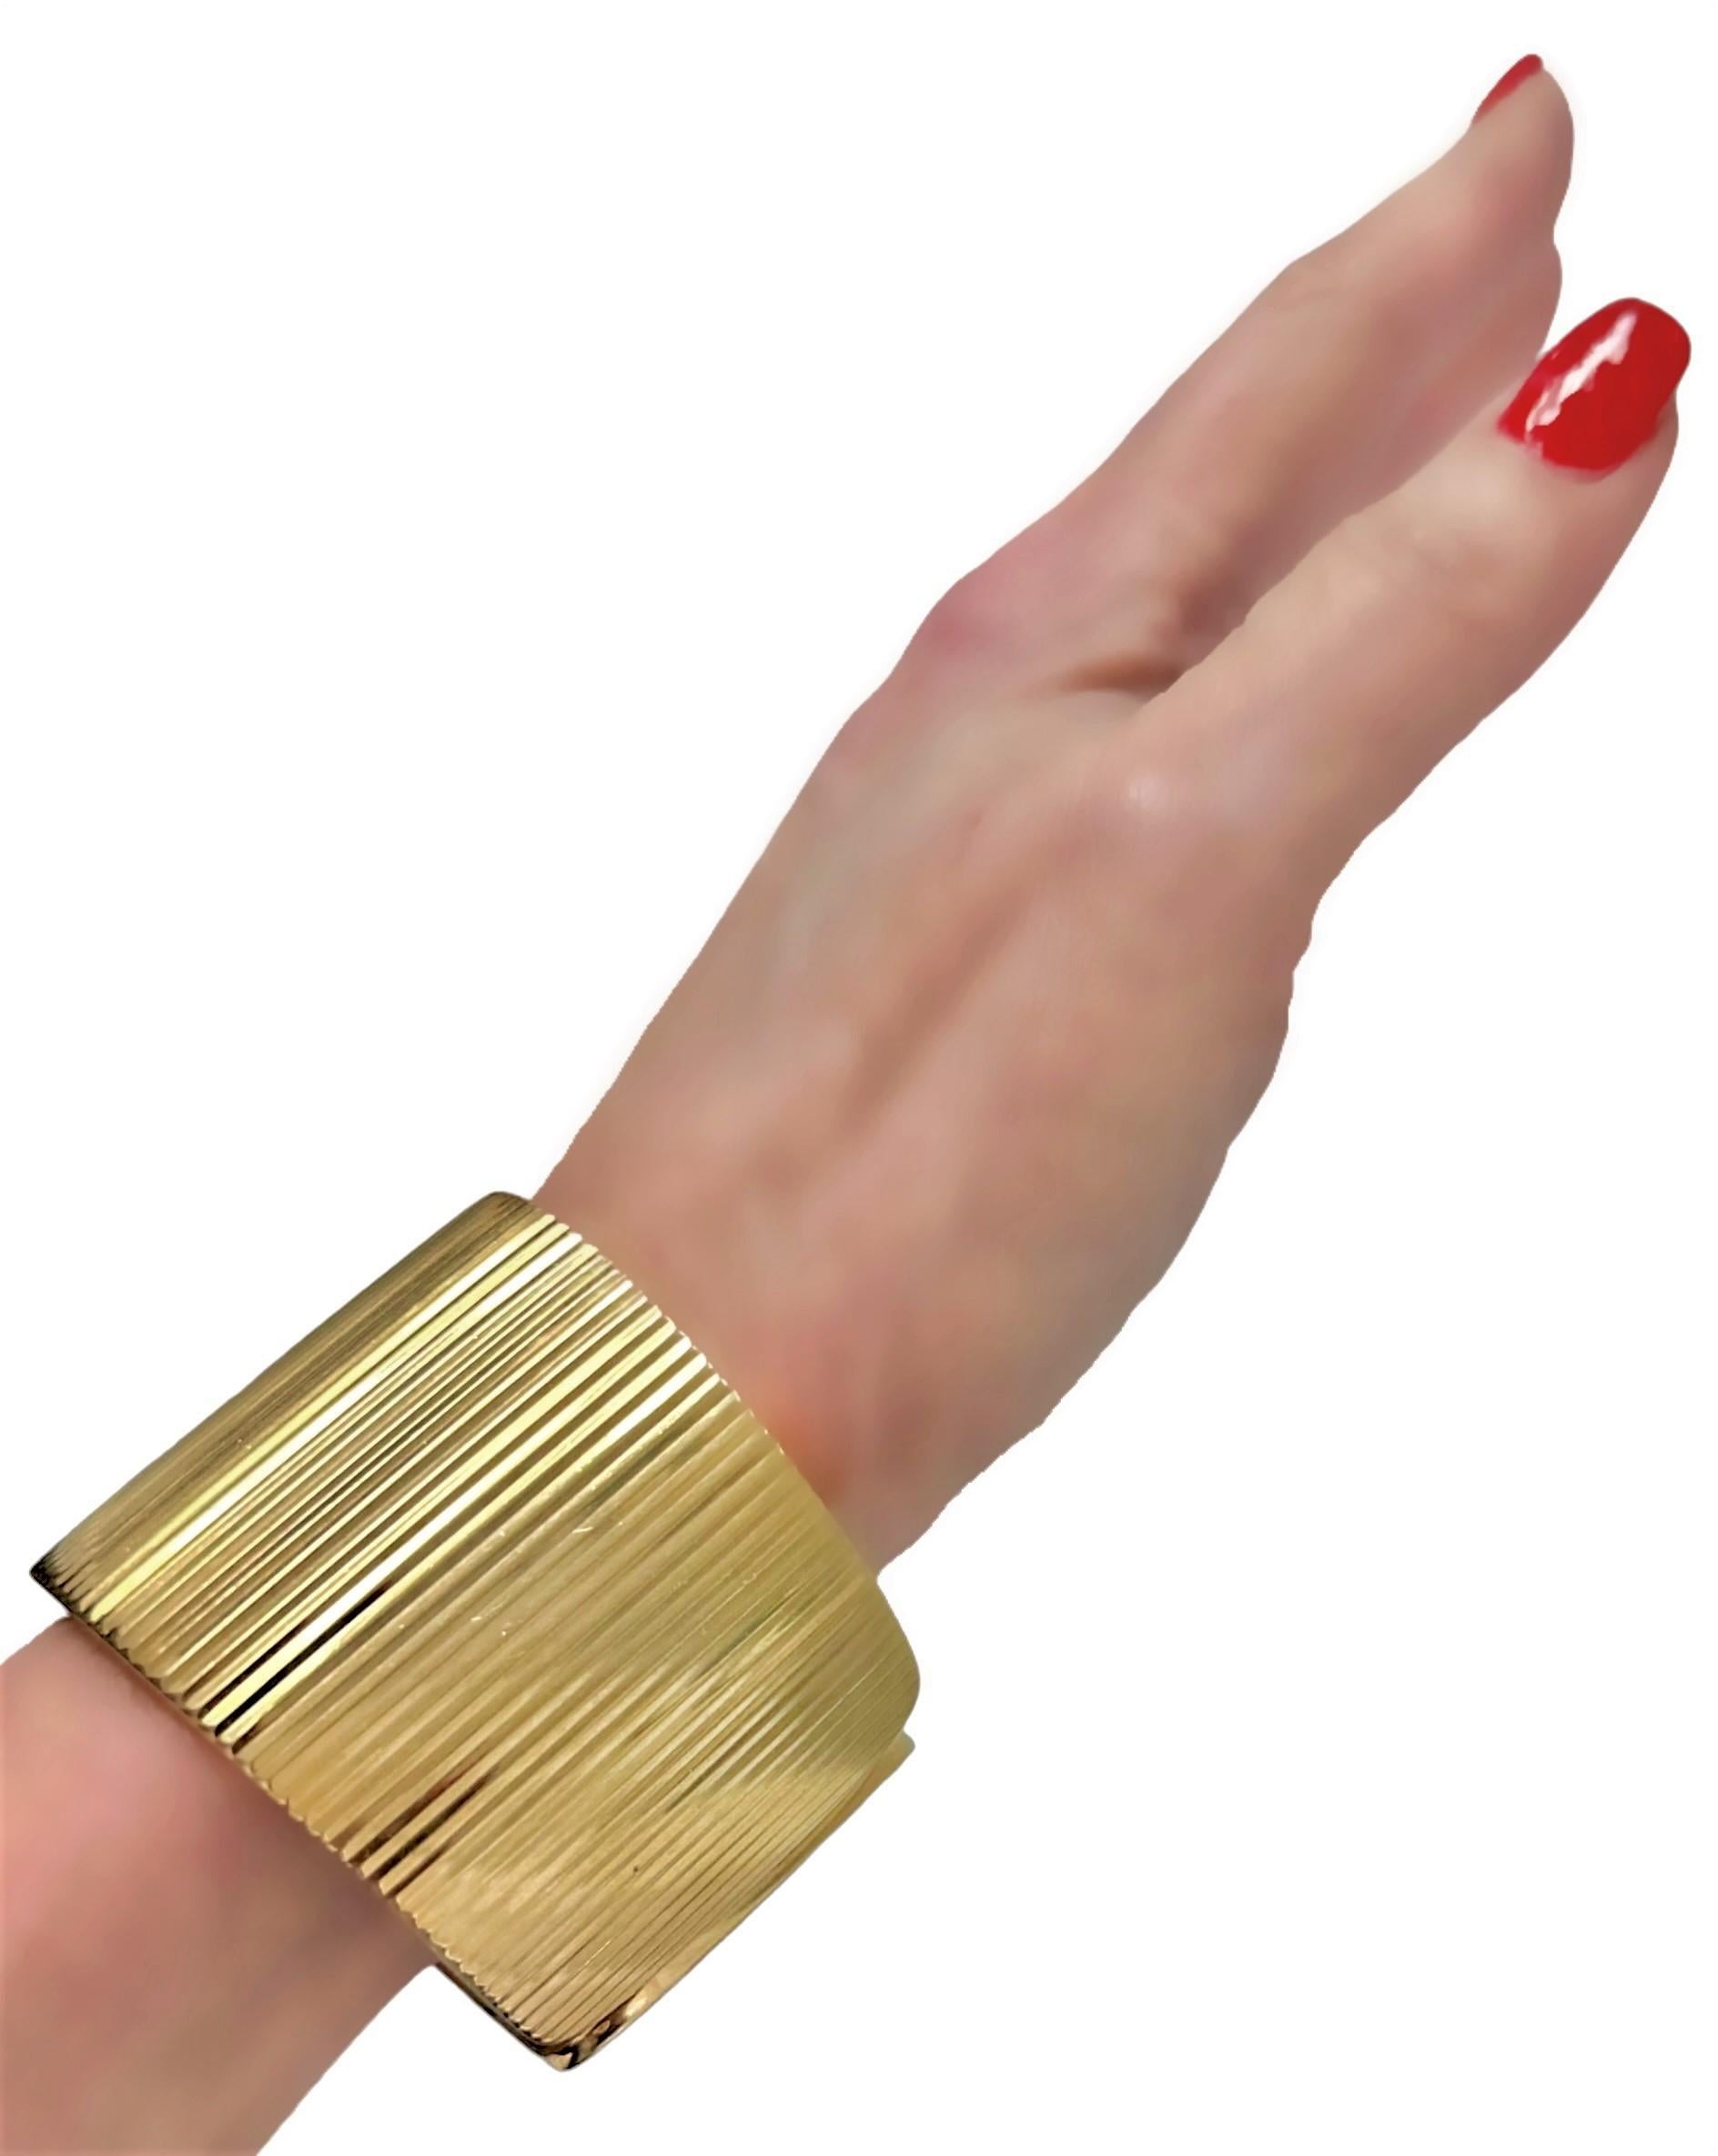 Mid-20th Century, 18K Yellow Gold Deeply Beveled Cuff Bracelet For Sale 7